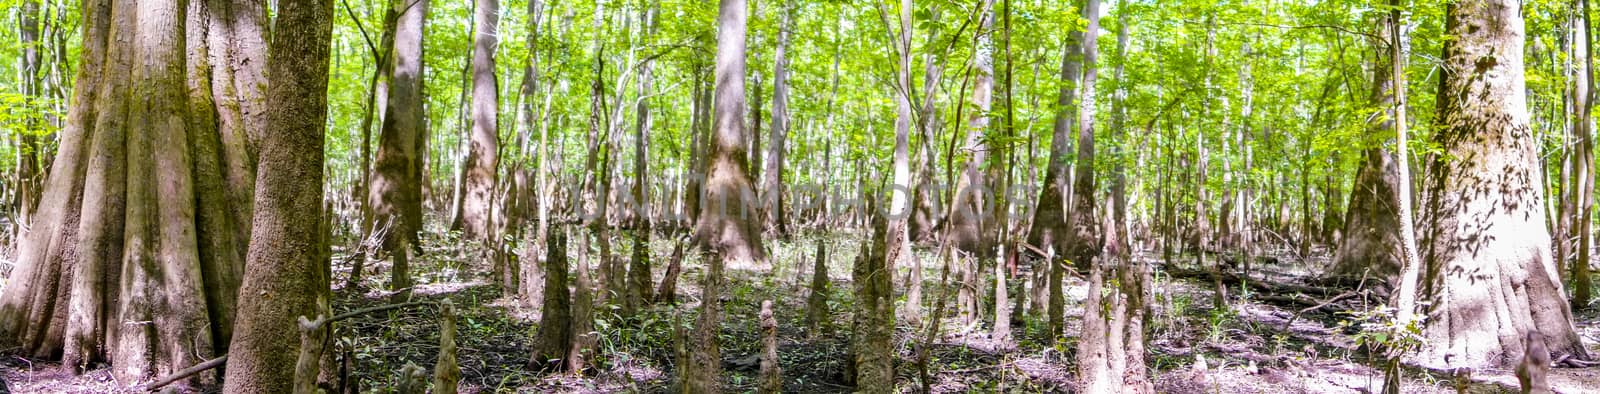 cypress forest and swamp of Congaree National Park in South Caro by digidreamgrafix